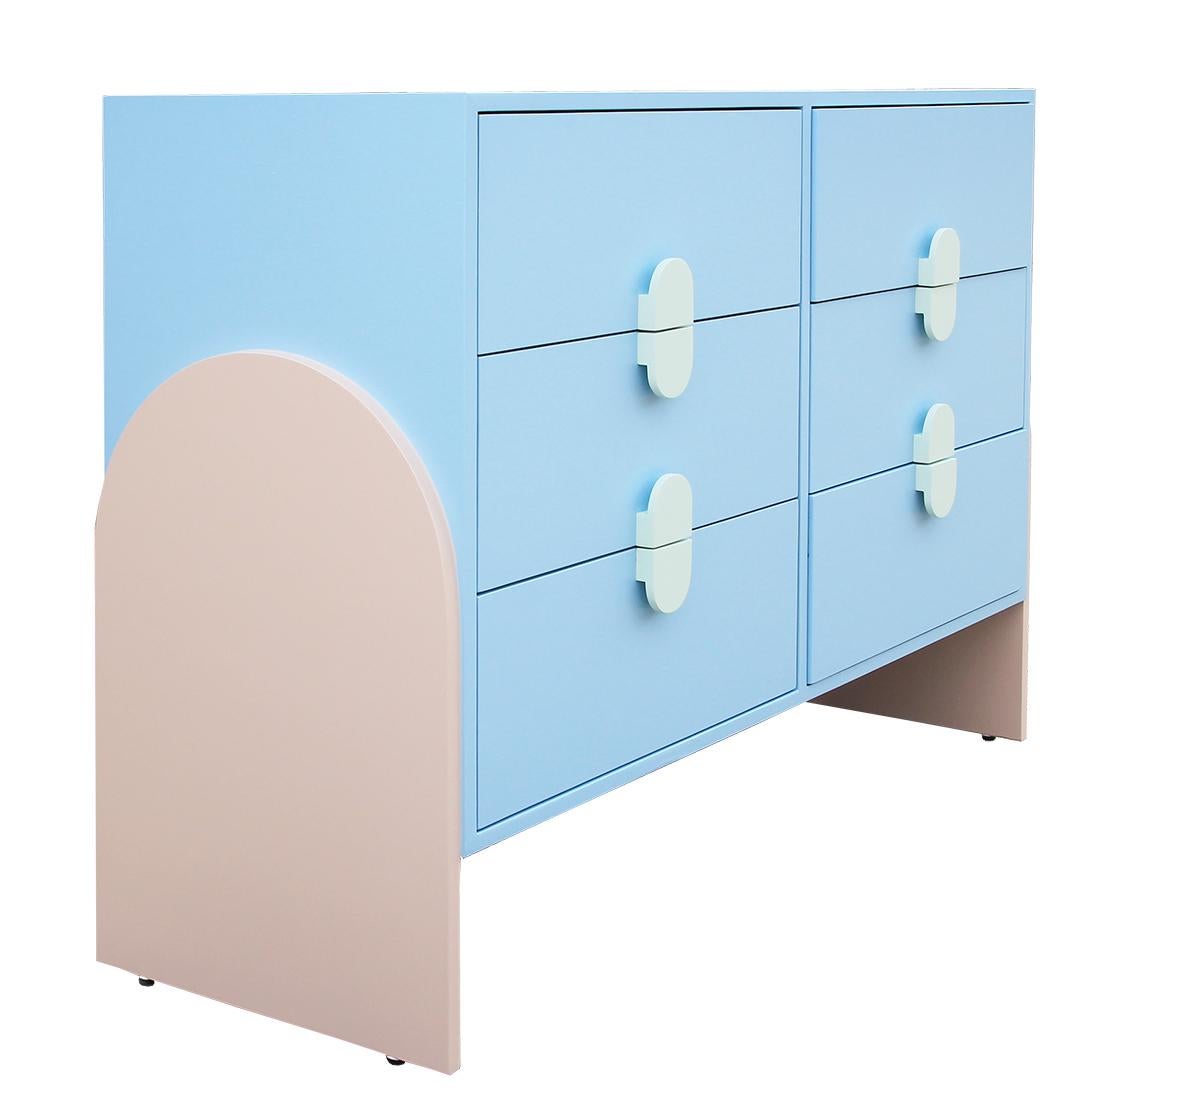 Wonderful custom-made pastel color Post Modern 6 drawer dresser or chest. This handmade piece of furniture has great lines from all angles. Designed and constructed in Houston Texas by Reeves Art + Design. The dresser was inspired by the wonderful